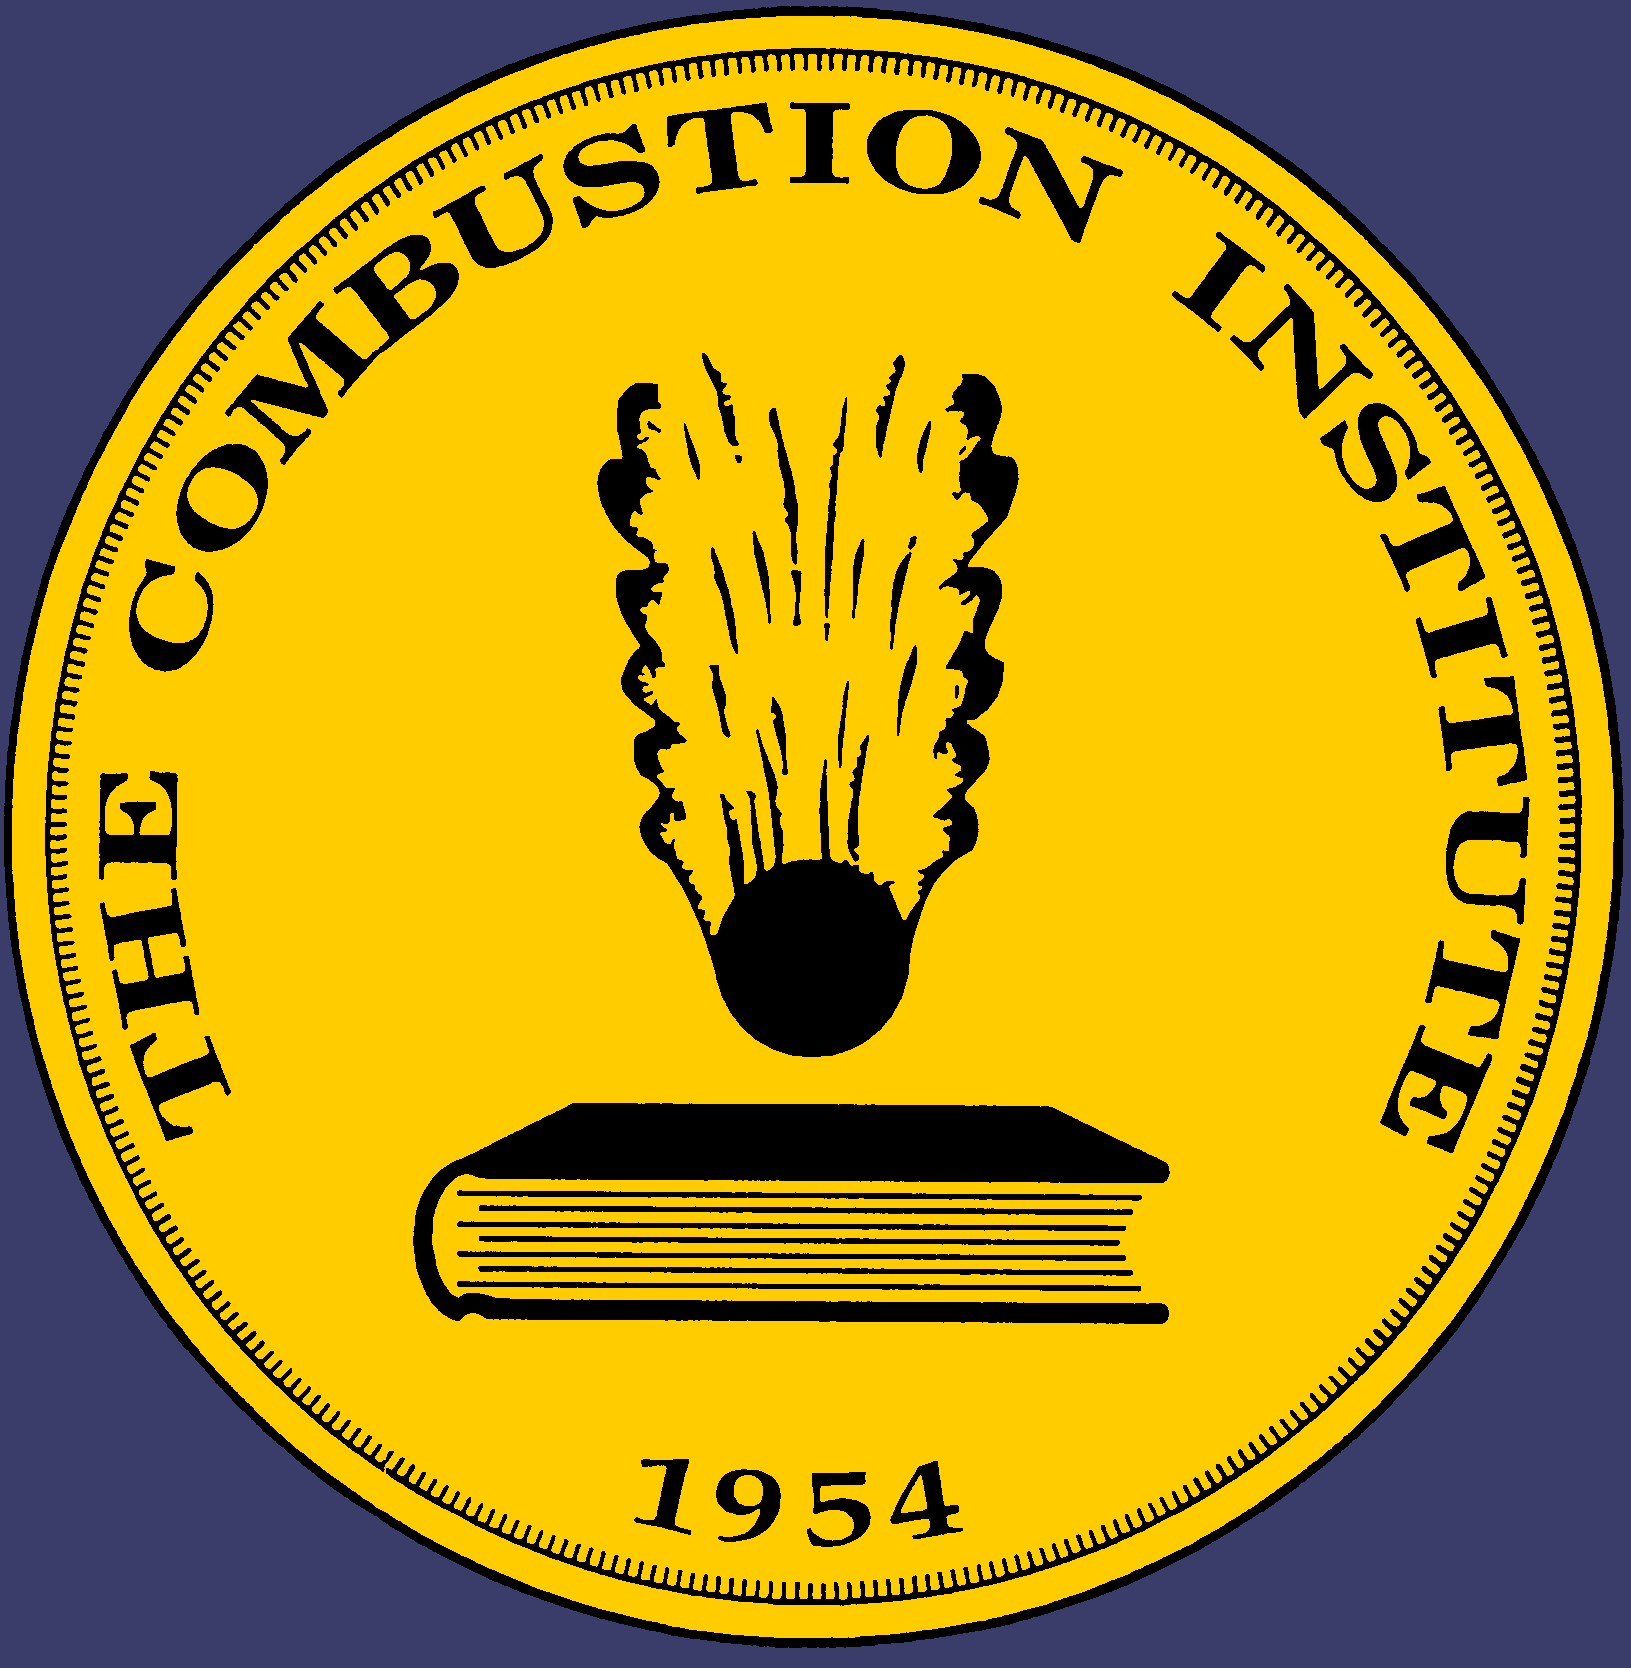 Combustion Institute (German Section)